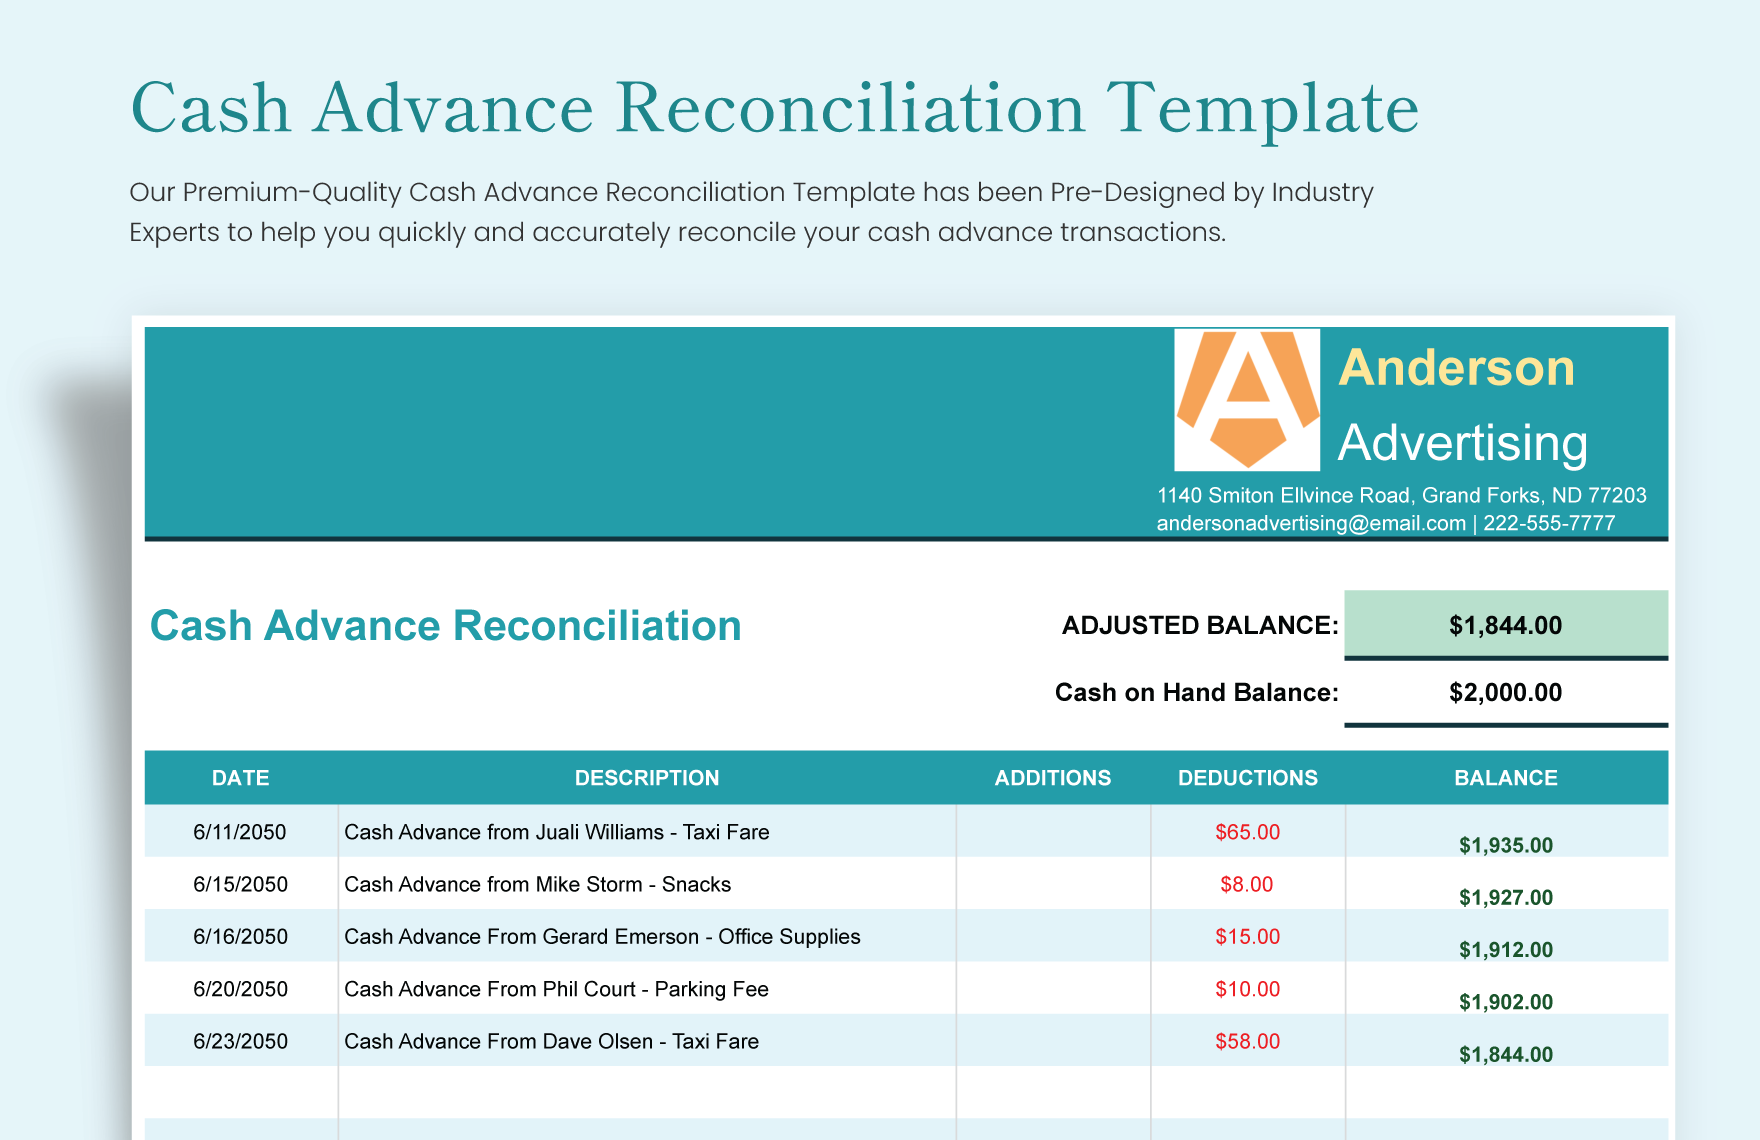 Cash Advance Reconciliation Template in Excel, Google Sheets